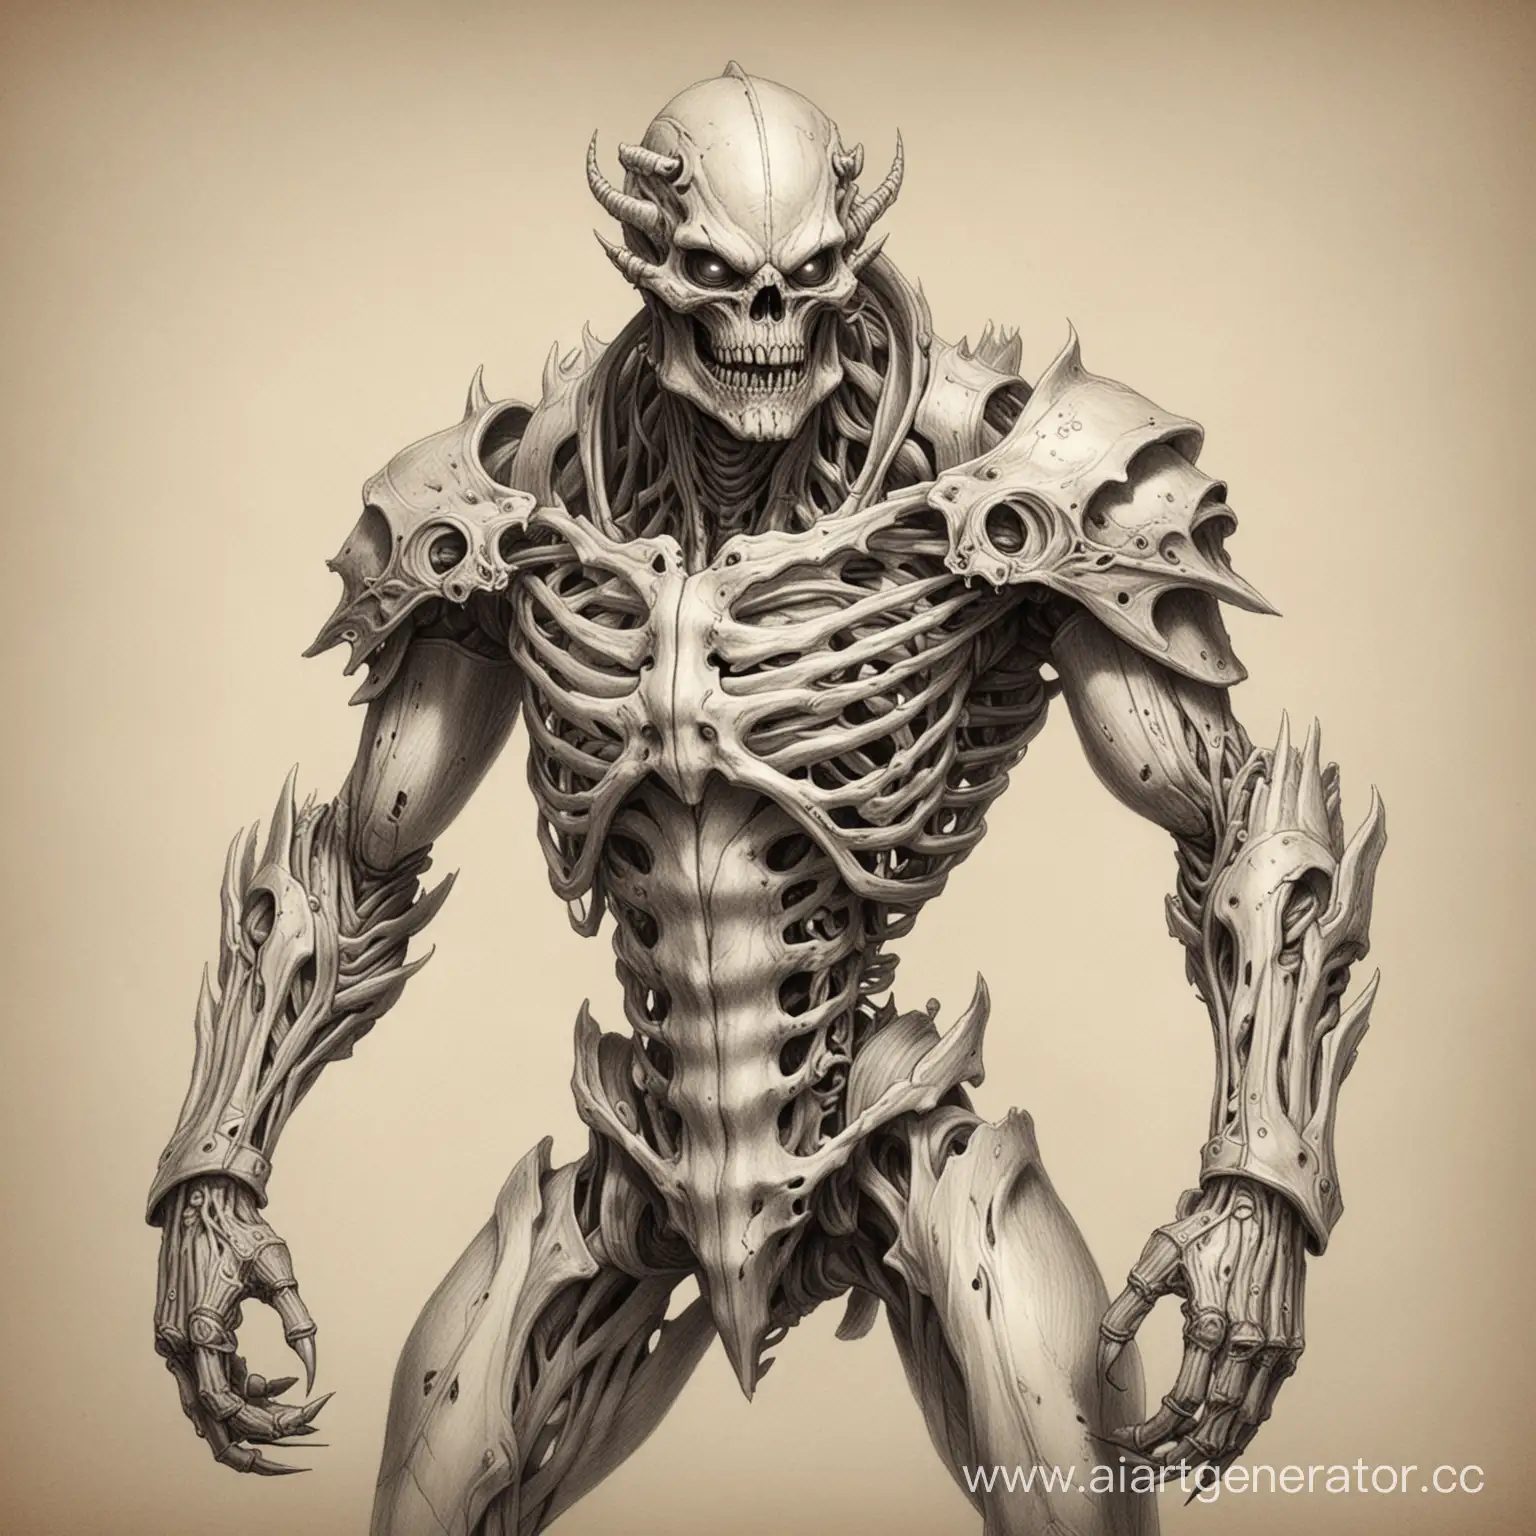 Sinister-Humanoid-Monster-with-Bone-Armor-Pencil-Drawing